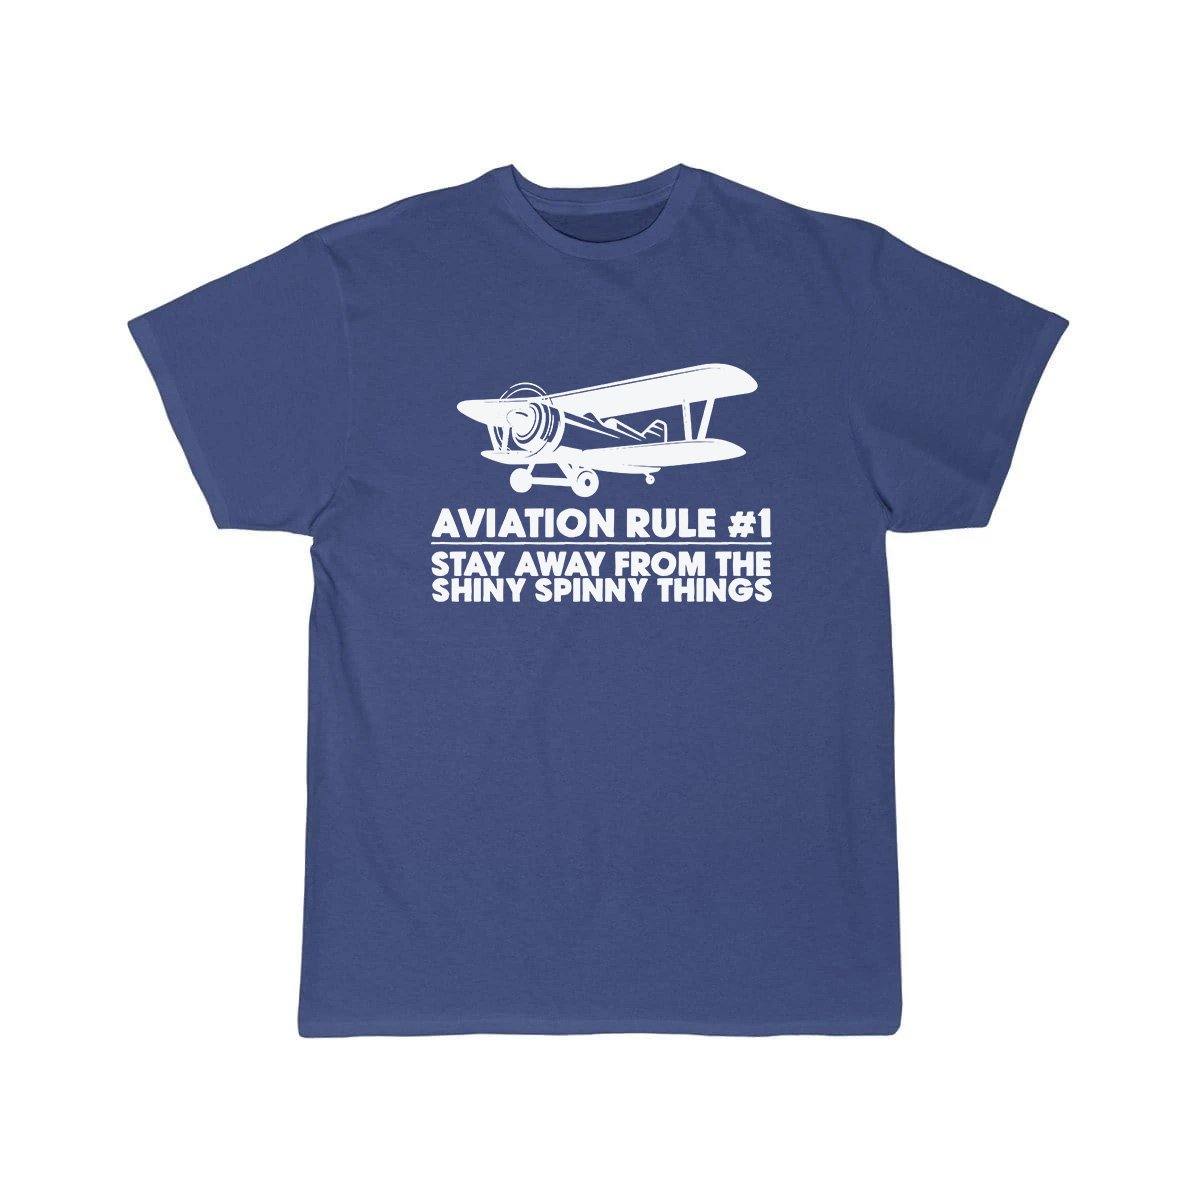 AVIATION RULE #1 STAY ALWAYS FROM THE SHINY SPINNY THINGS T SHIRT THE AV8R